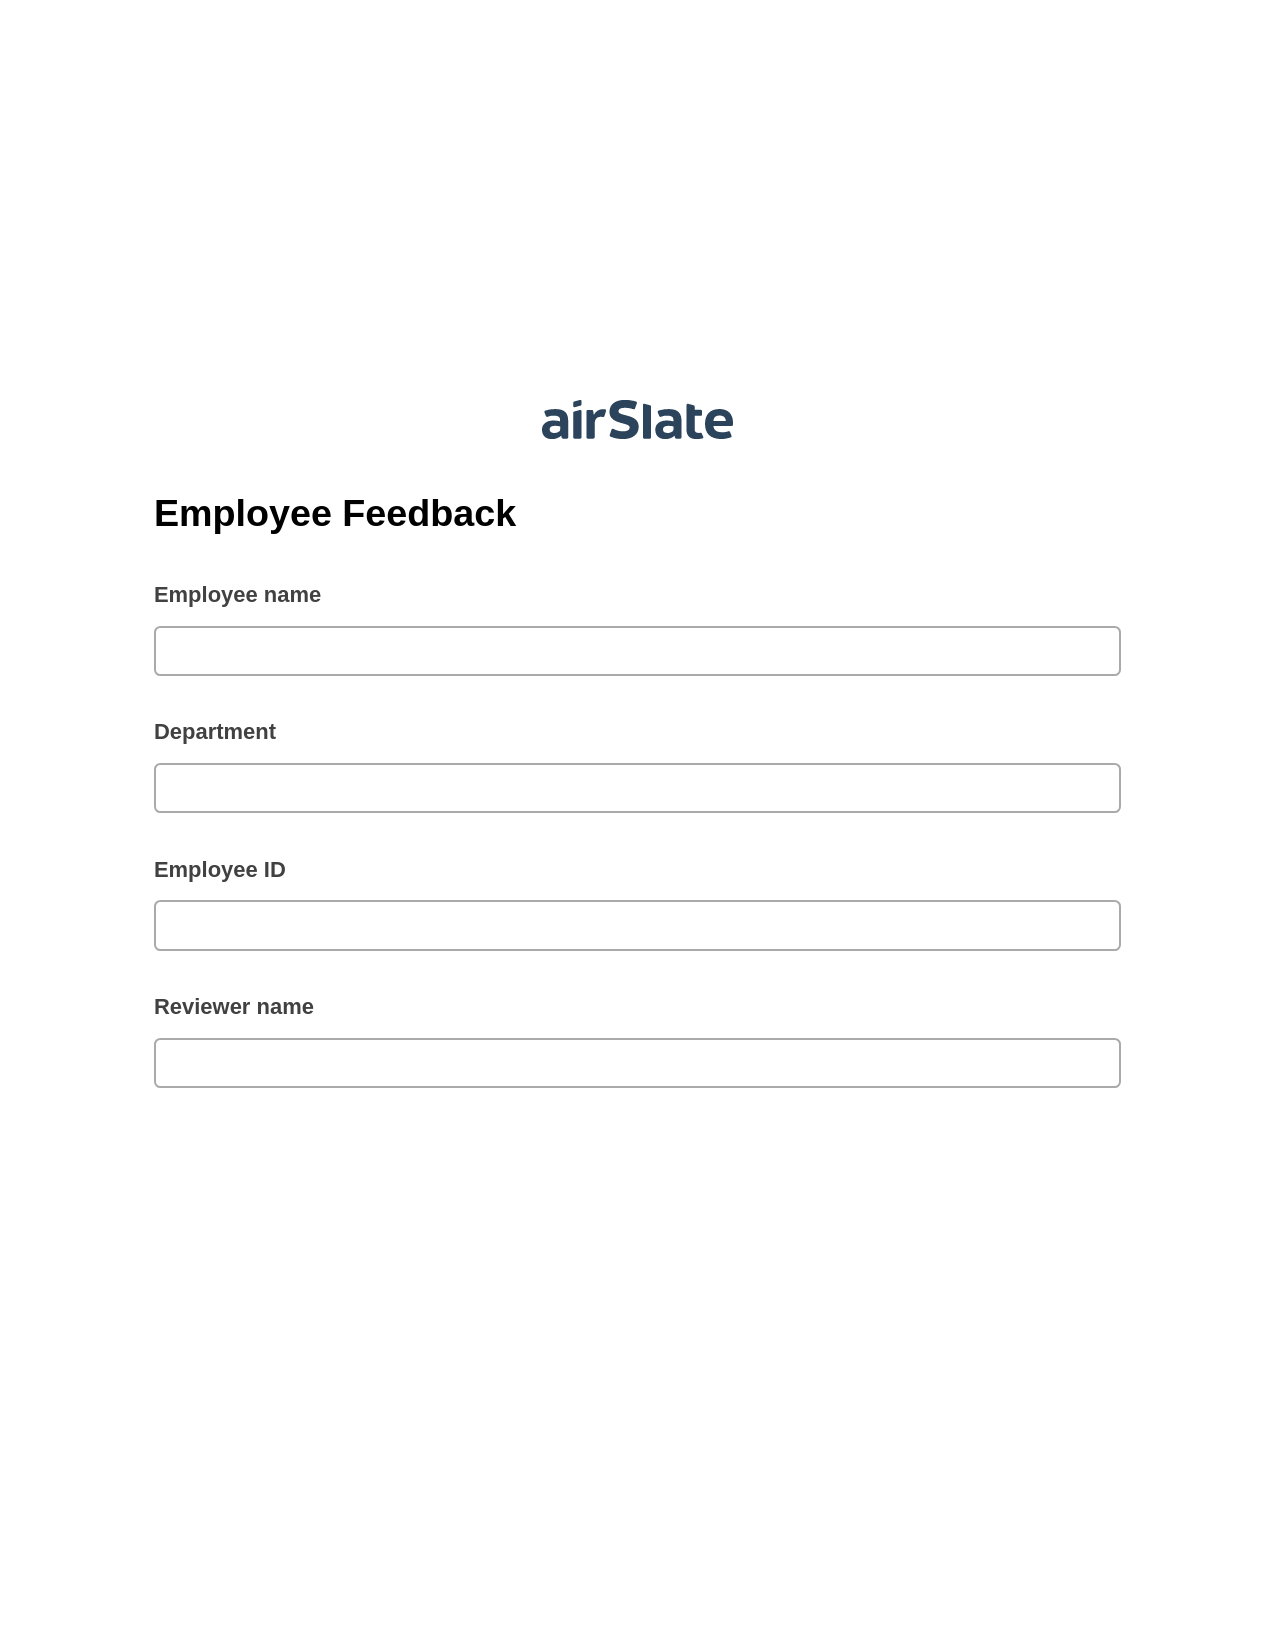 Employee Feedback Pre-fill Slate from MS Dynamics 365 Records Bot, Mailchimp add recipient to audience Bot, Export to Excel 365 Bot